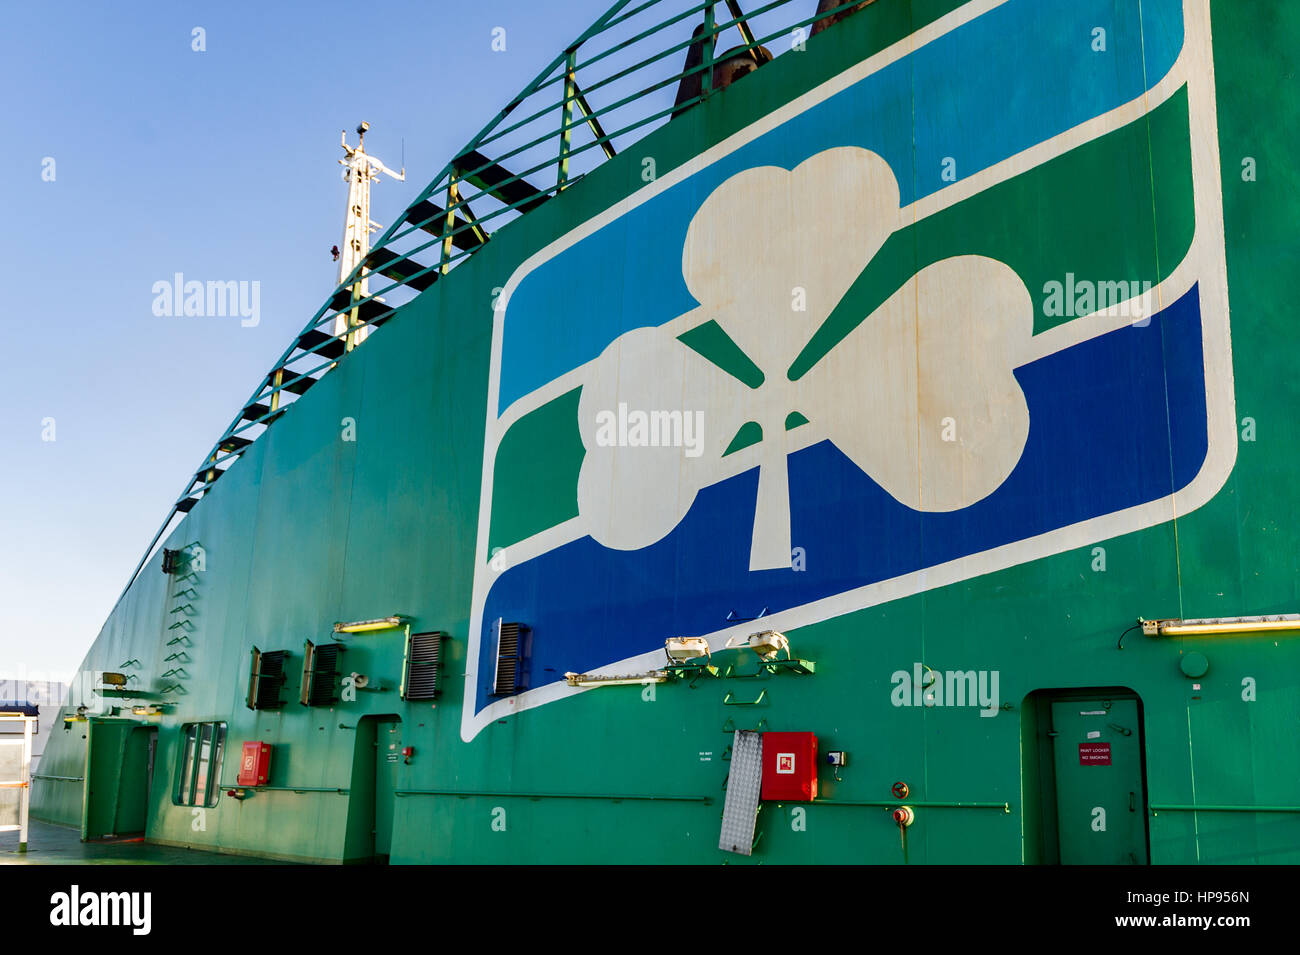 Irish Ferries logo on the funnel of car ferry Ulysses, the largest car ferry in the world. Stock Photo